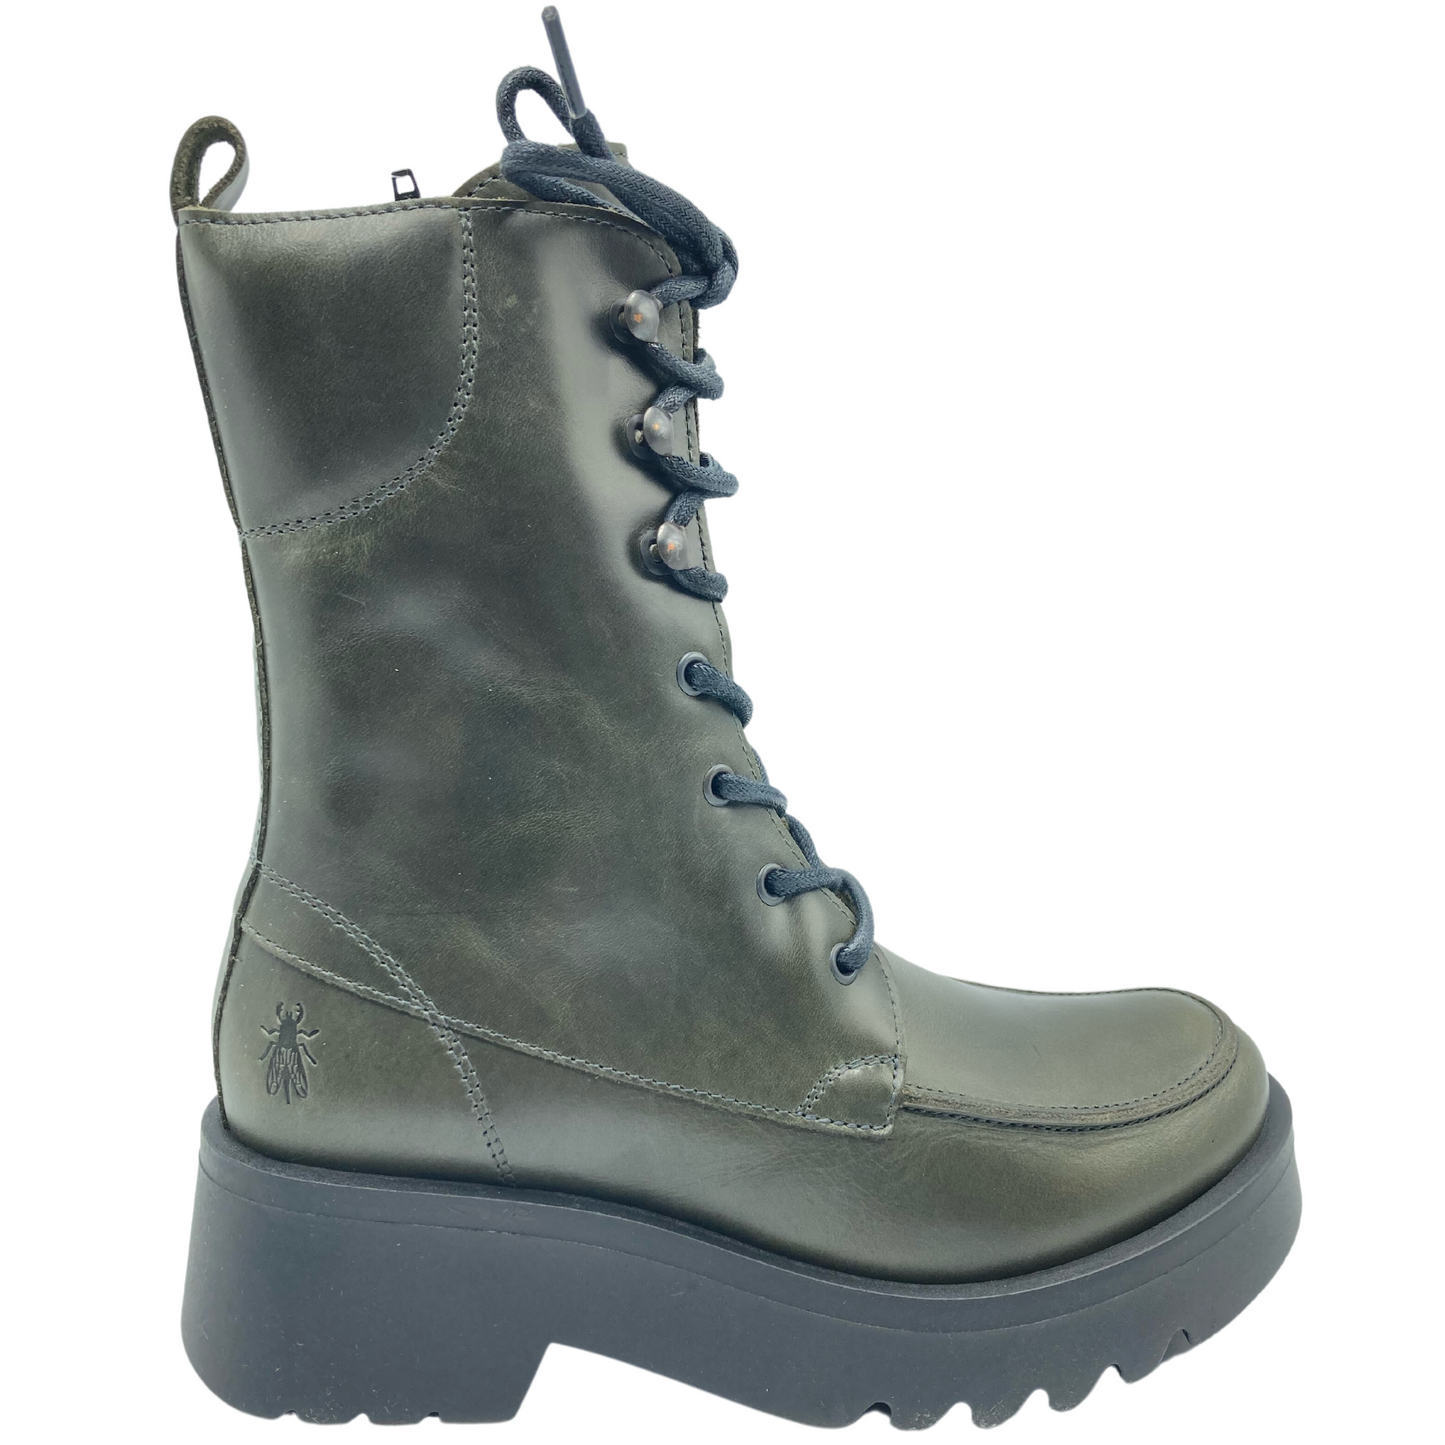 Right facing view of calf height green leather boot with black laces and black rubber sole.